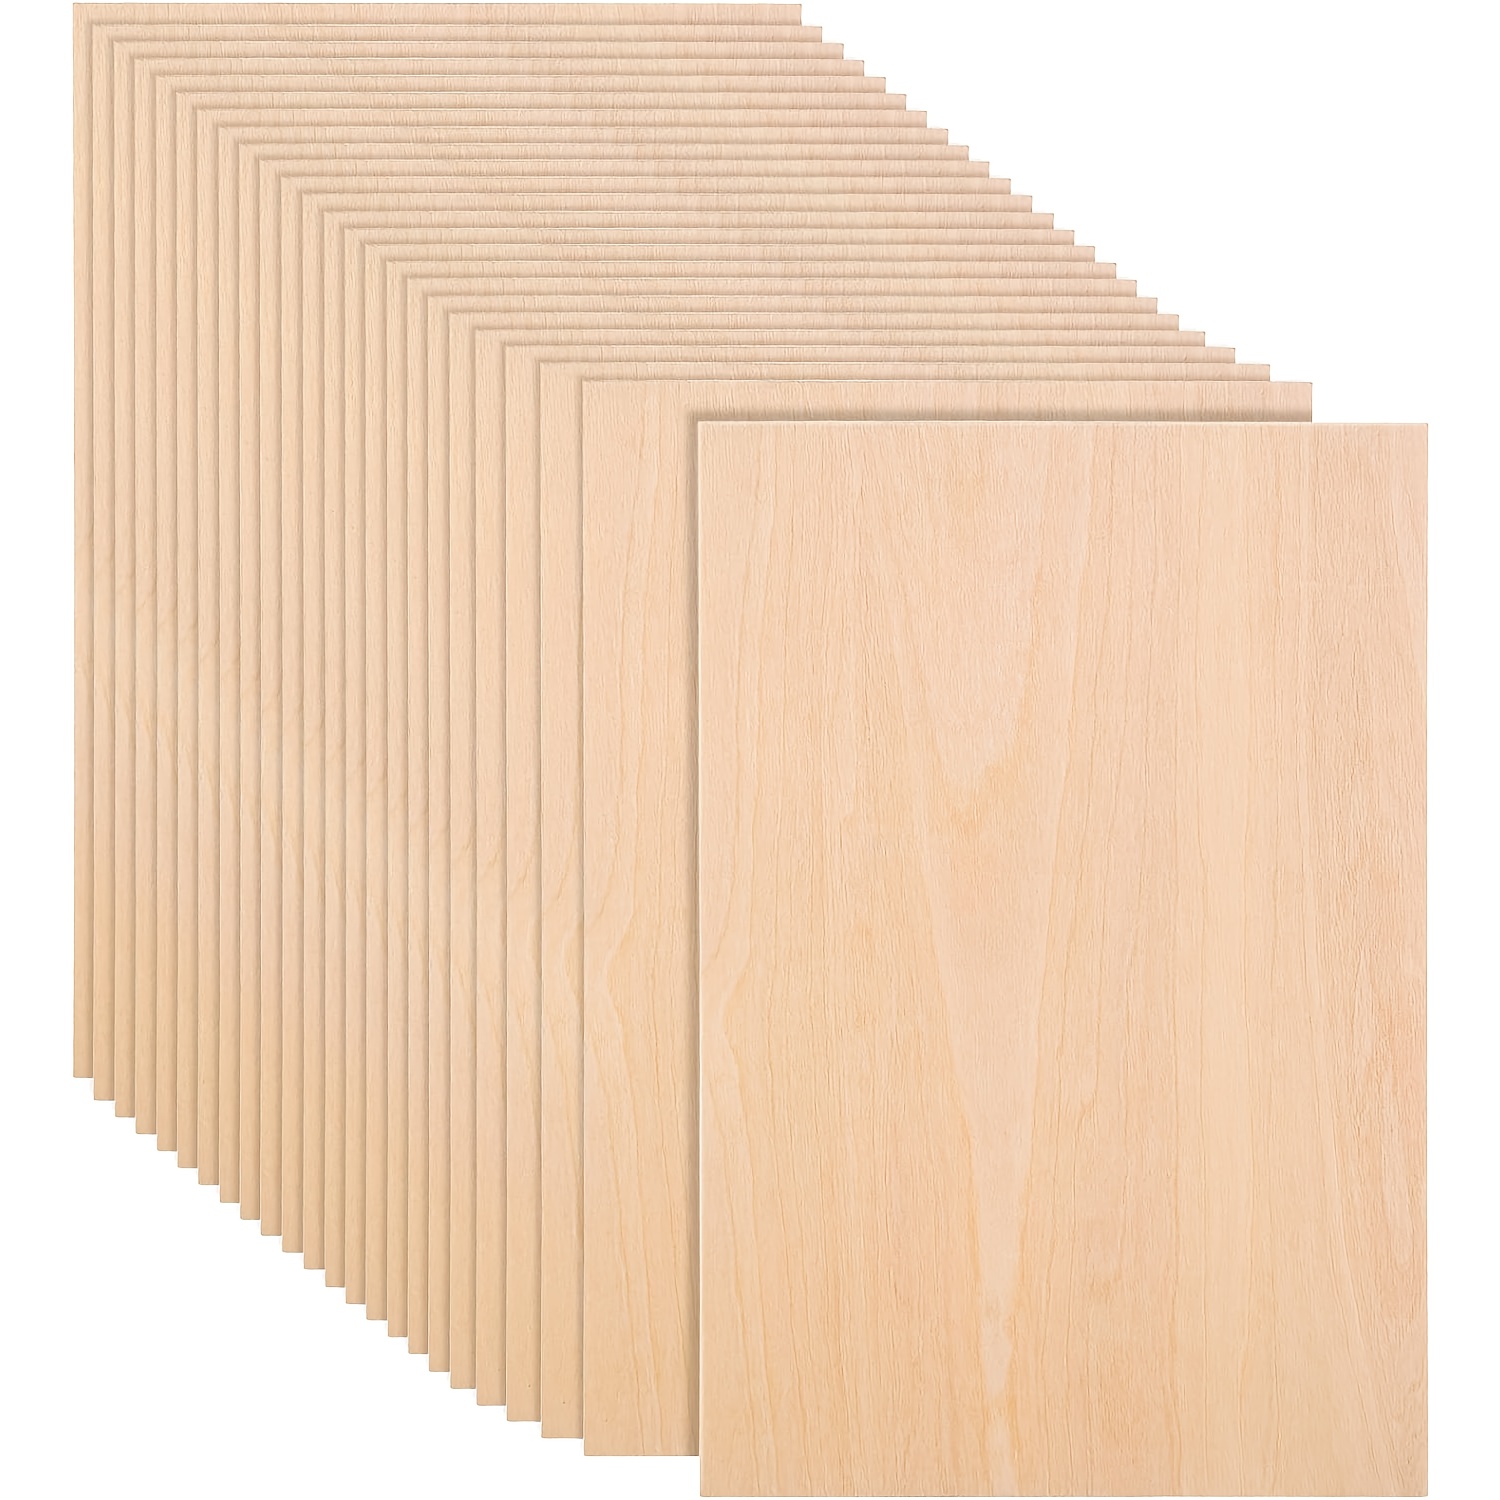 

Basswood Sheets For Crafts-7.87*11.81inch - 2mm Thick Plywood Sheets With Smooth Surfaces-unfinished Squares Wood Boards For Laser Cutting, Wood Burning, Architectural Models, Staining